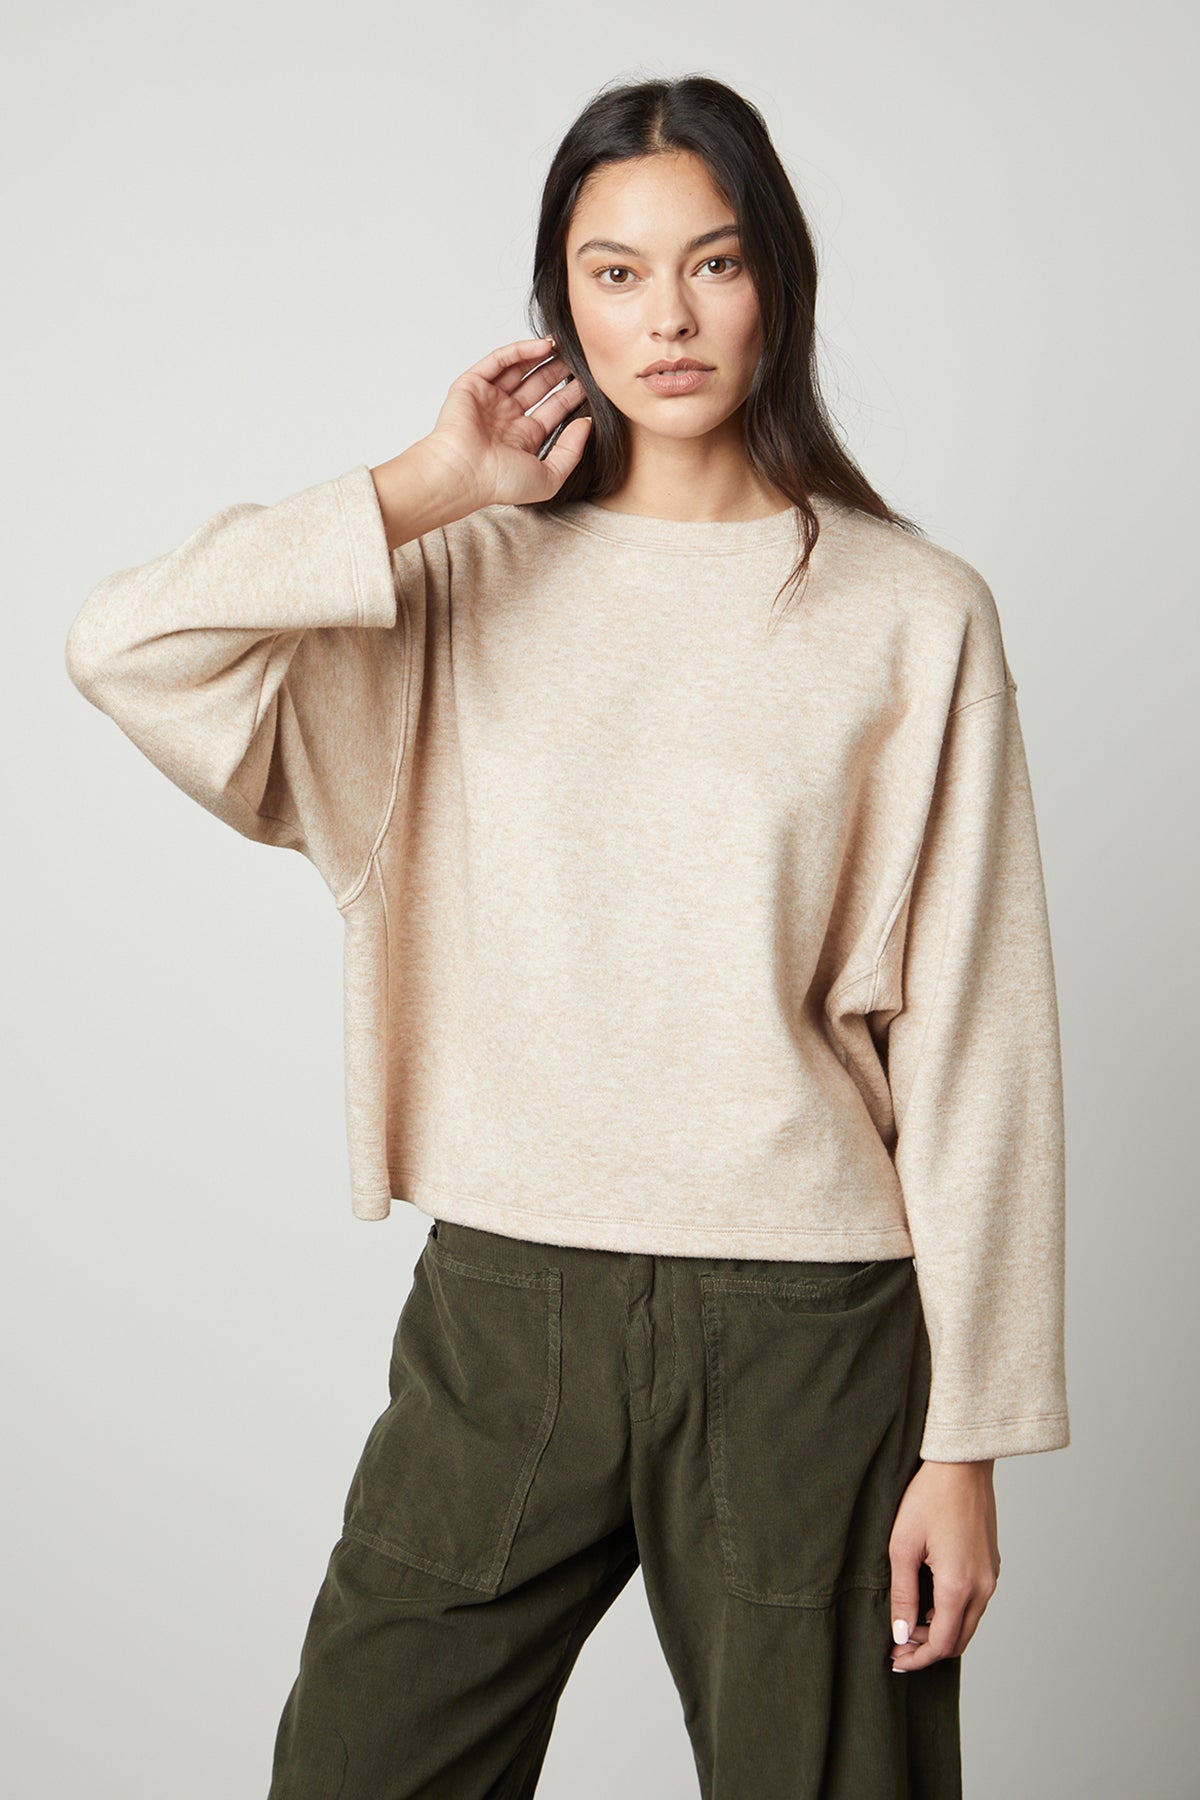 The model is wearing the NIA DOUBLE KNIT CROPPED CREW by Velvet by Graham & Spencer for a comfortable style.-35503558951105